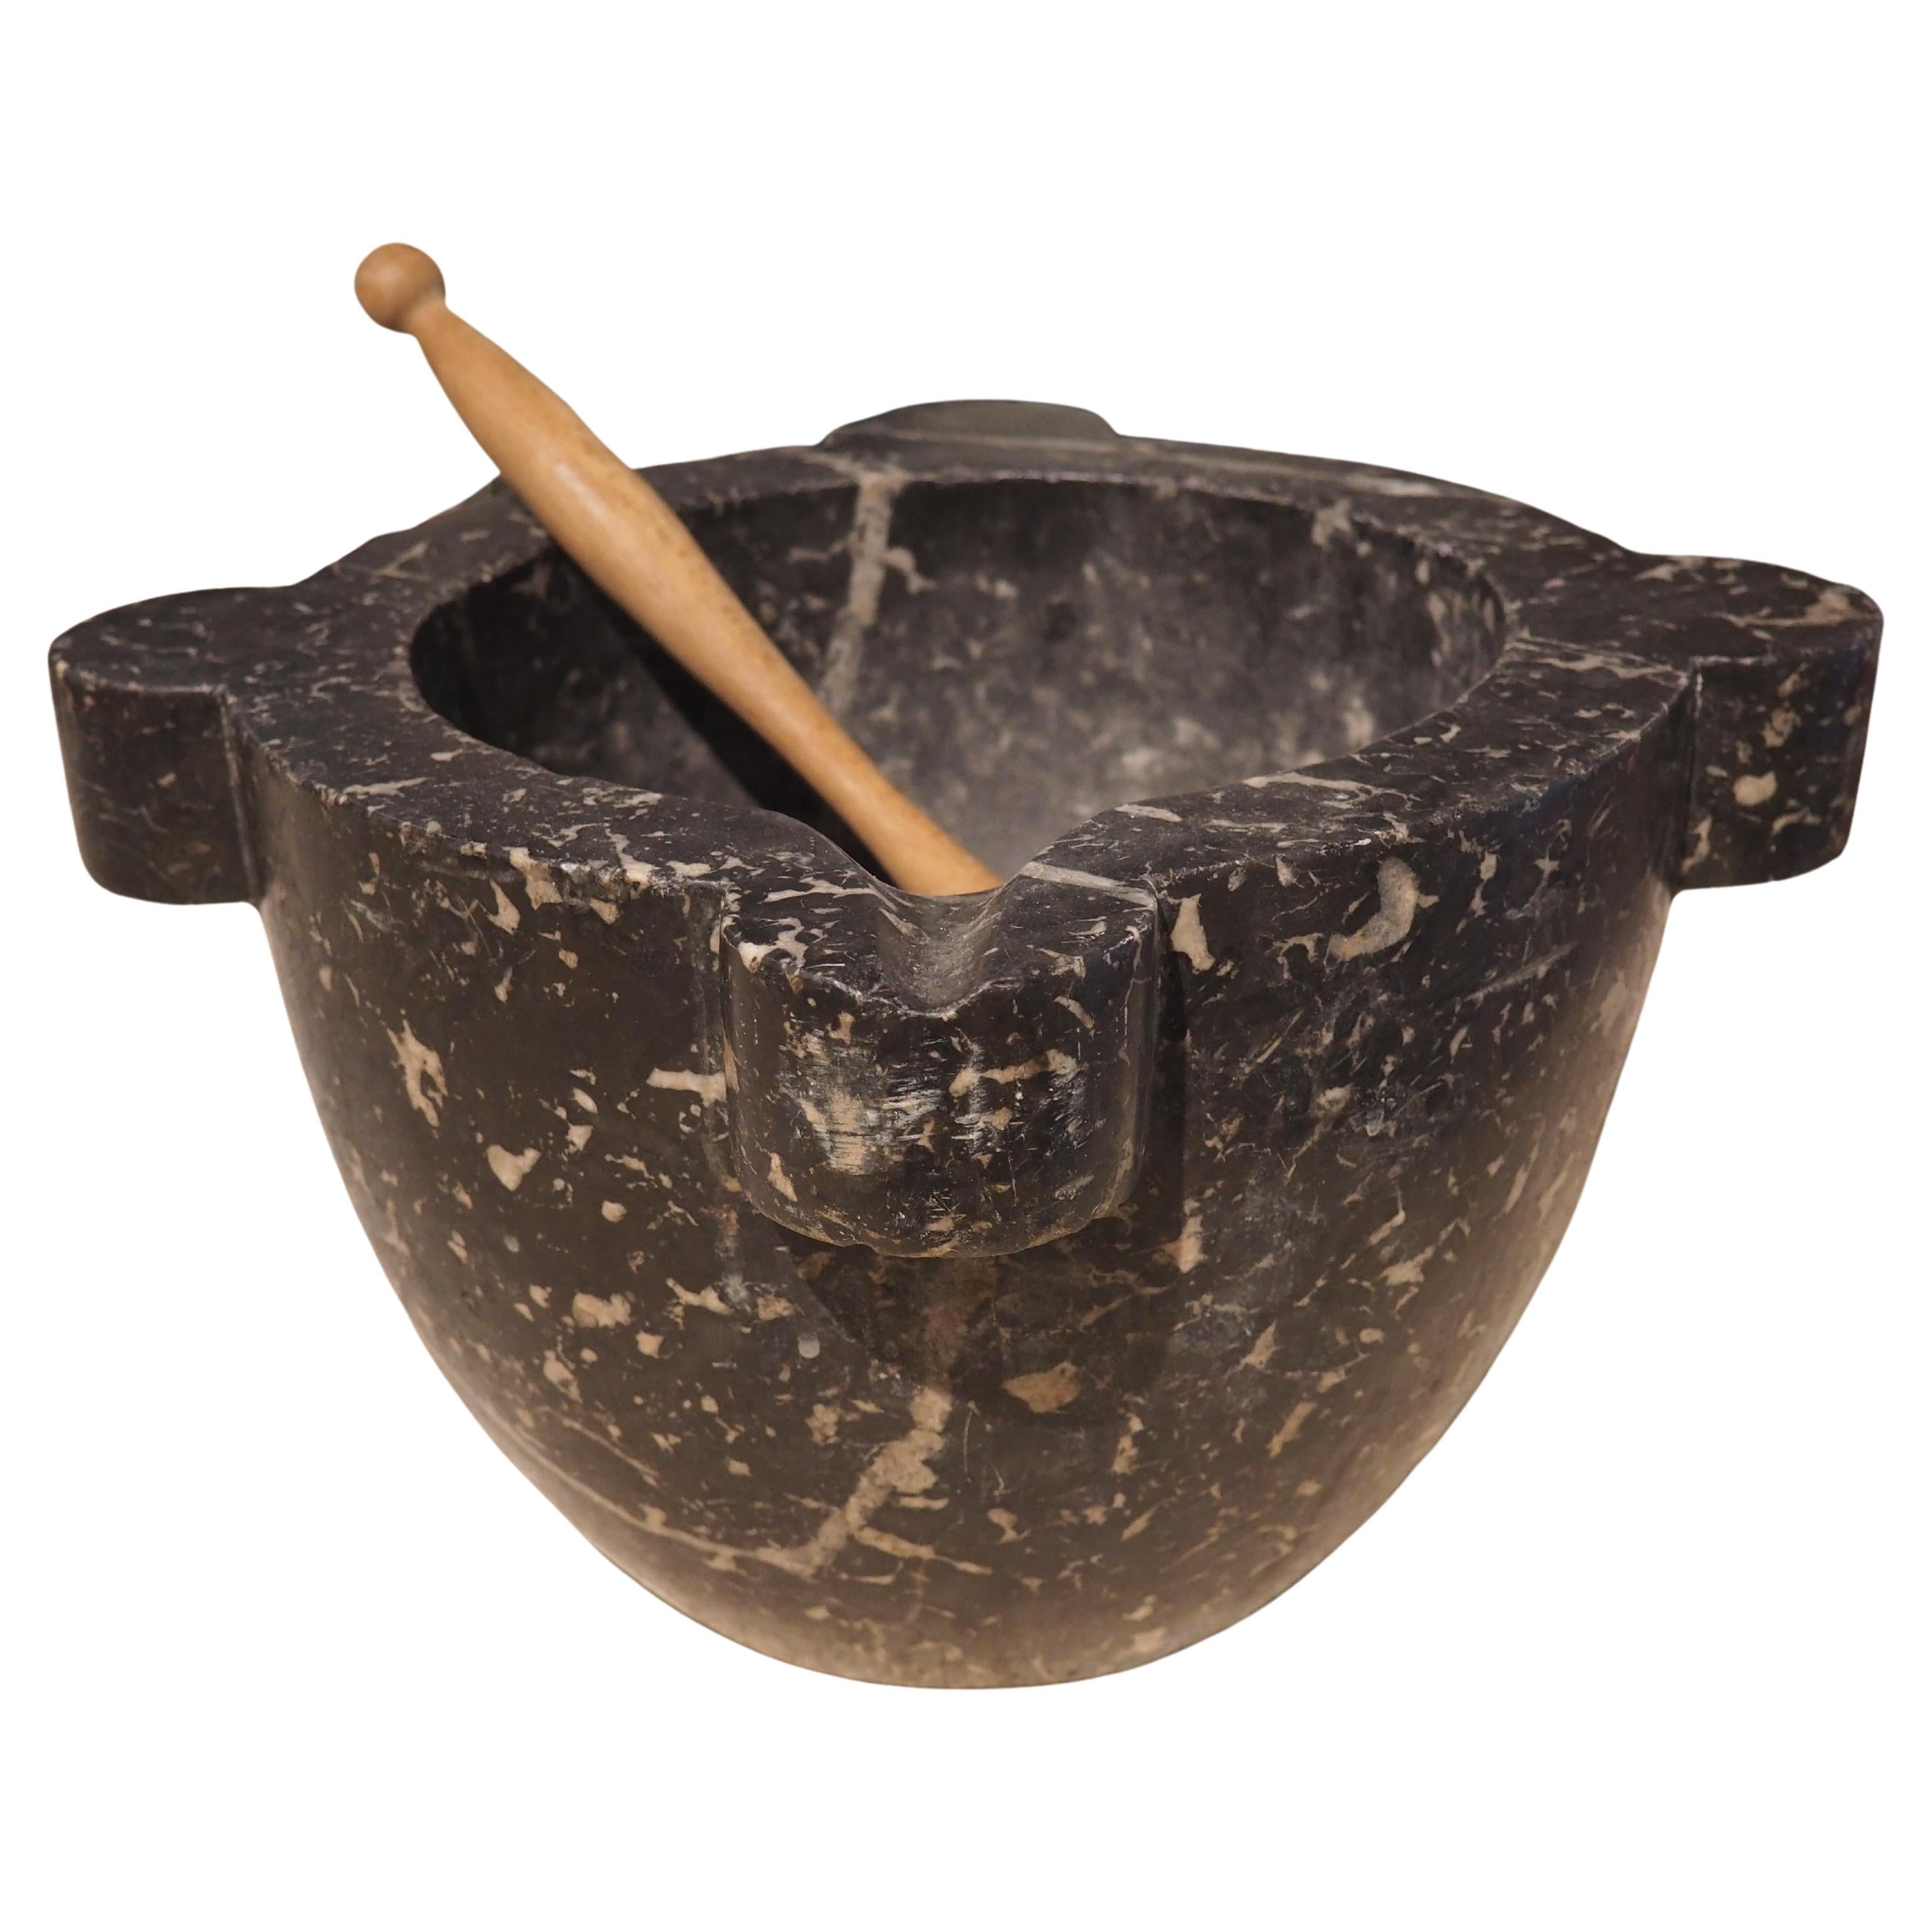 Large 19th Century Black Marble Mortar and Pestle from France